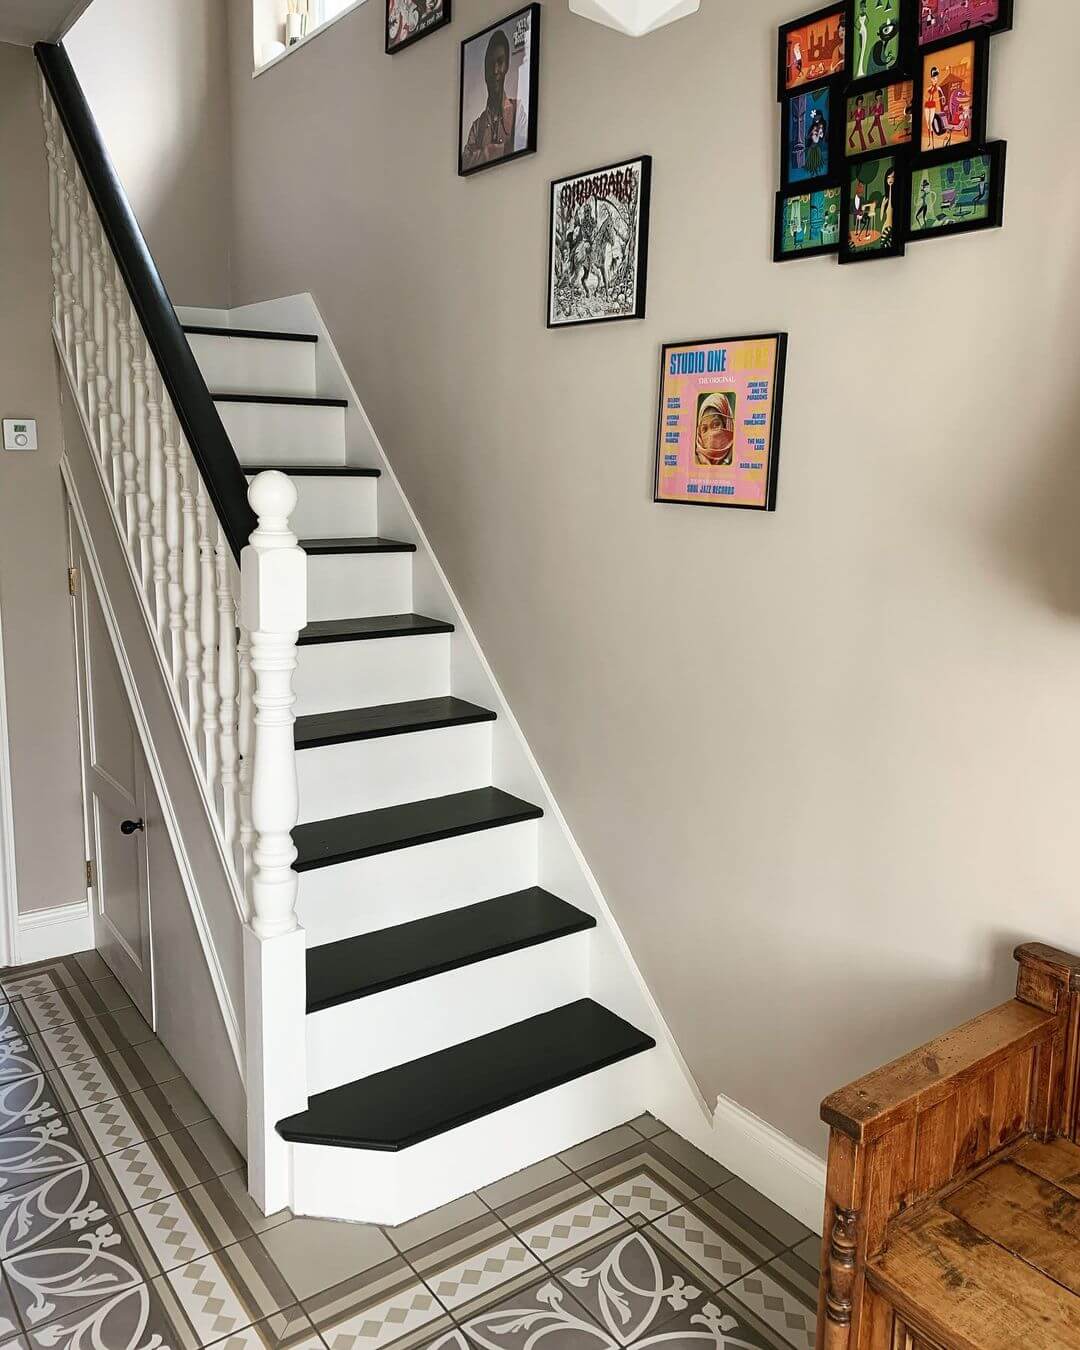 How to paint stairs, spindles and bannisters